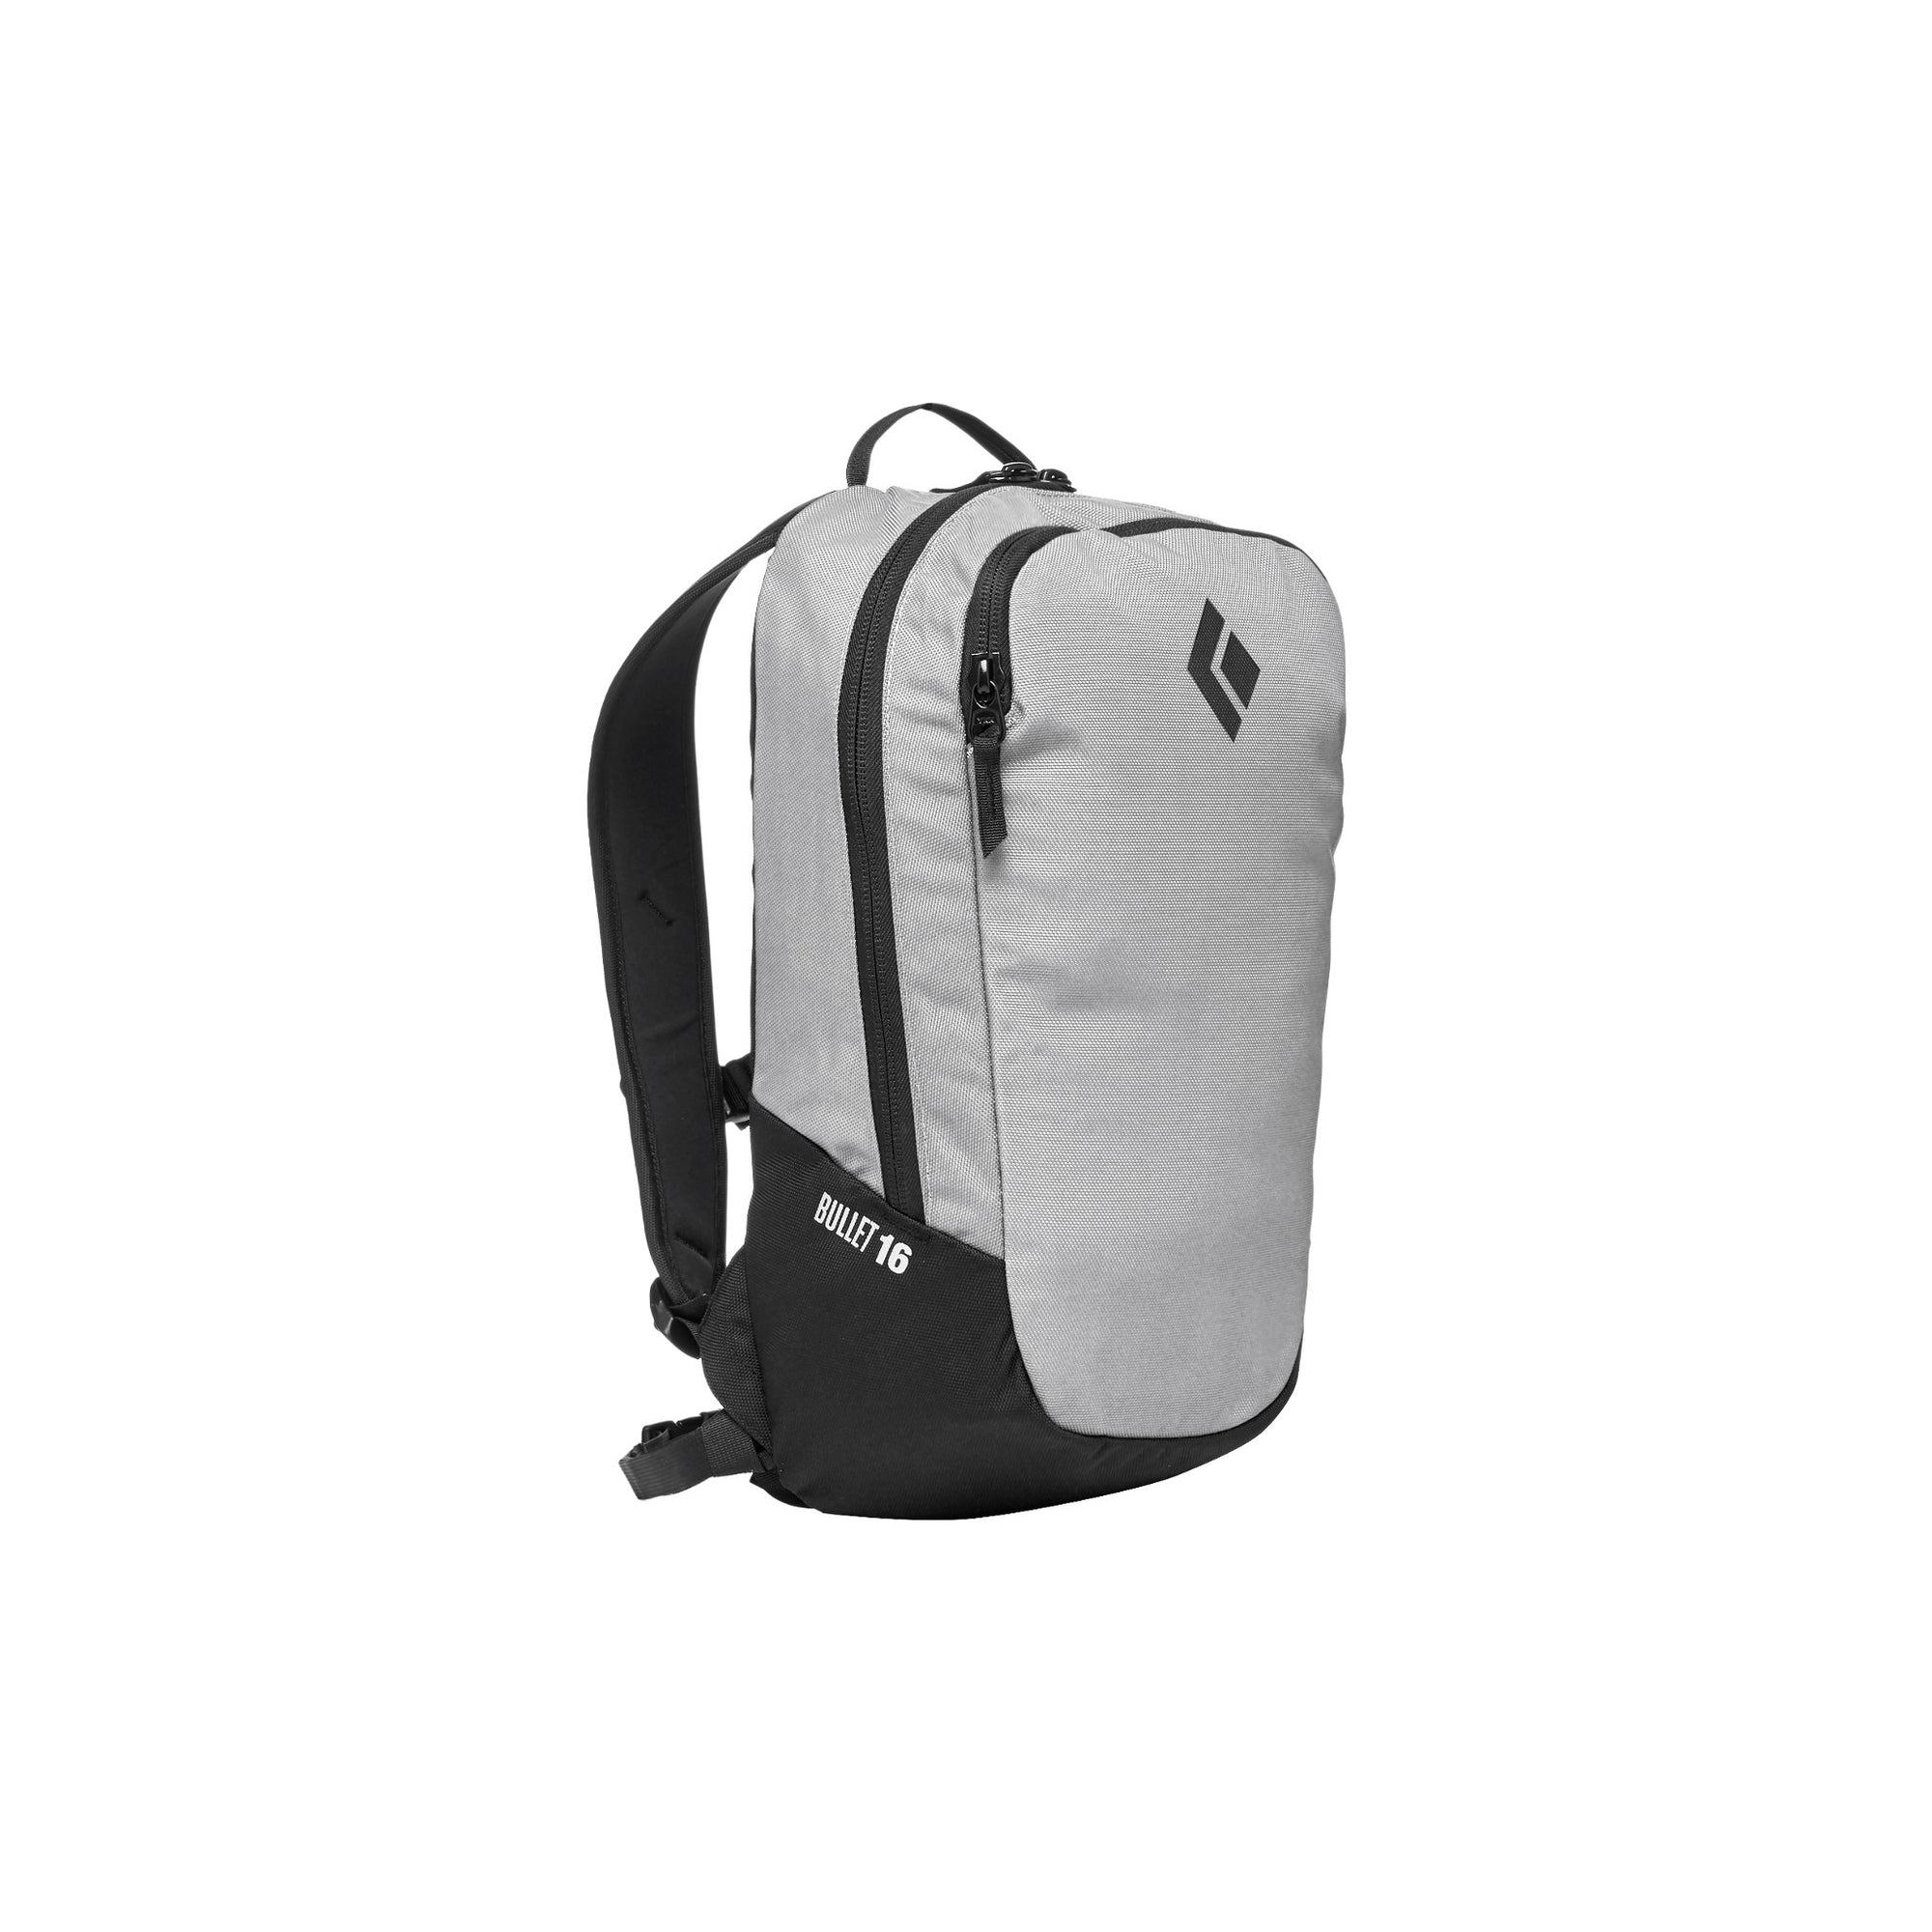 front of the pack. shows two pockets. color gray\